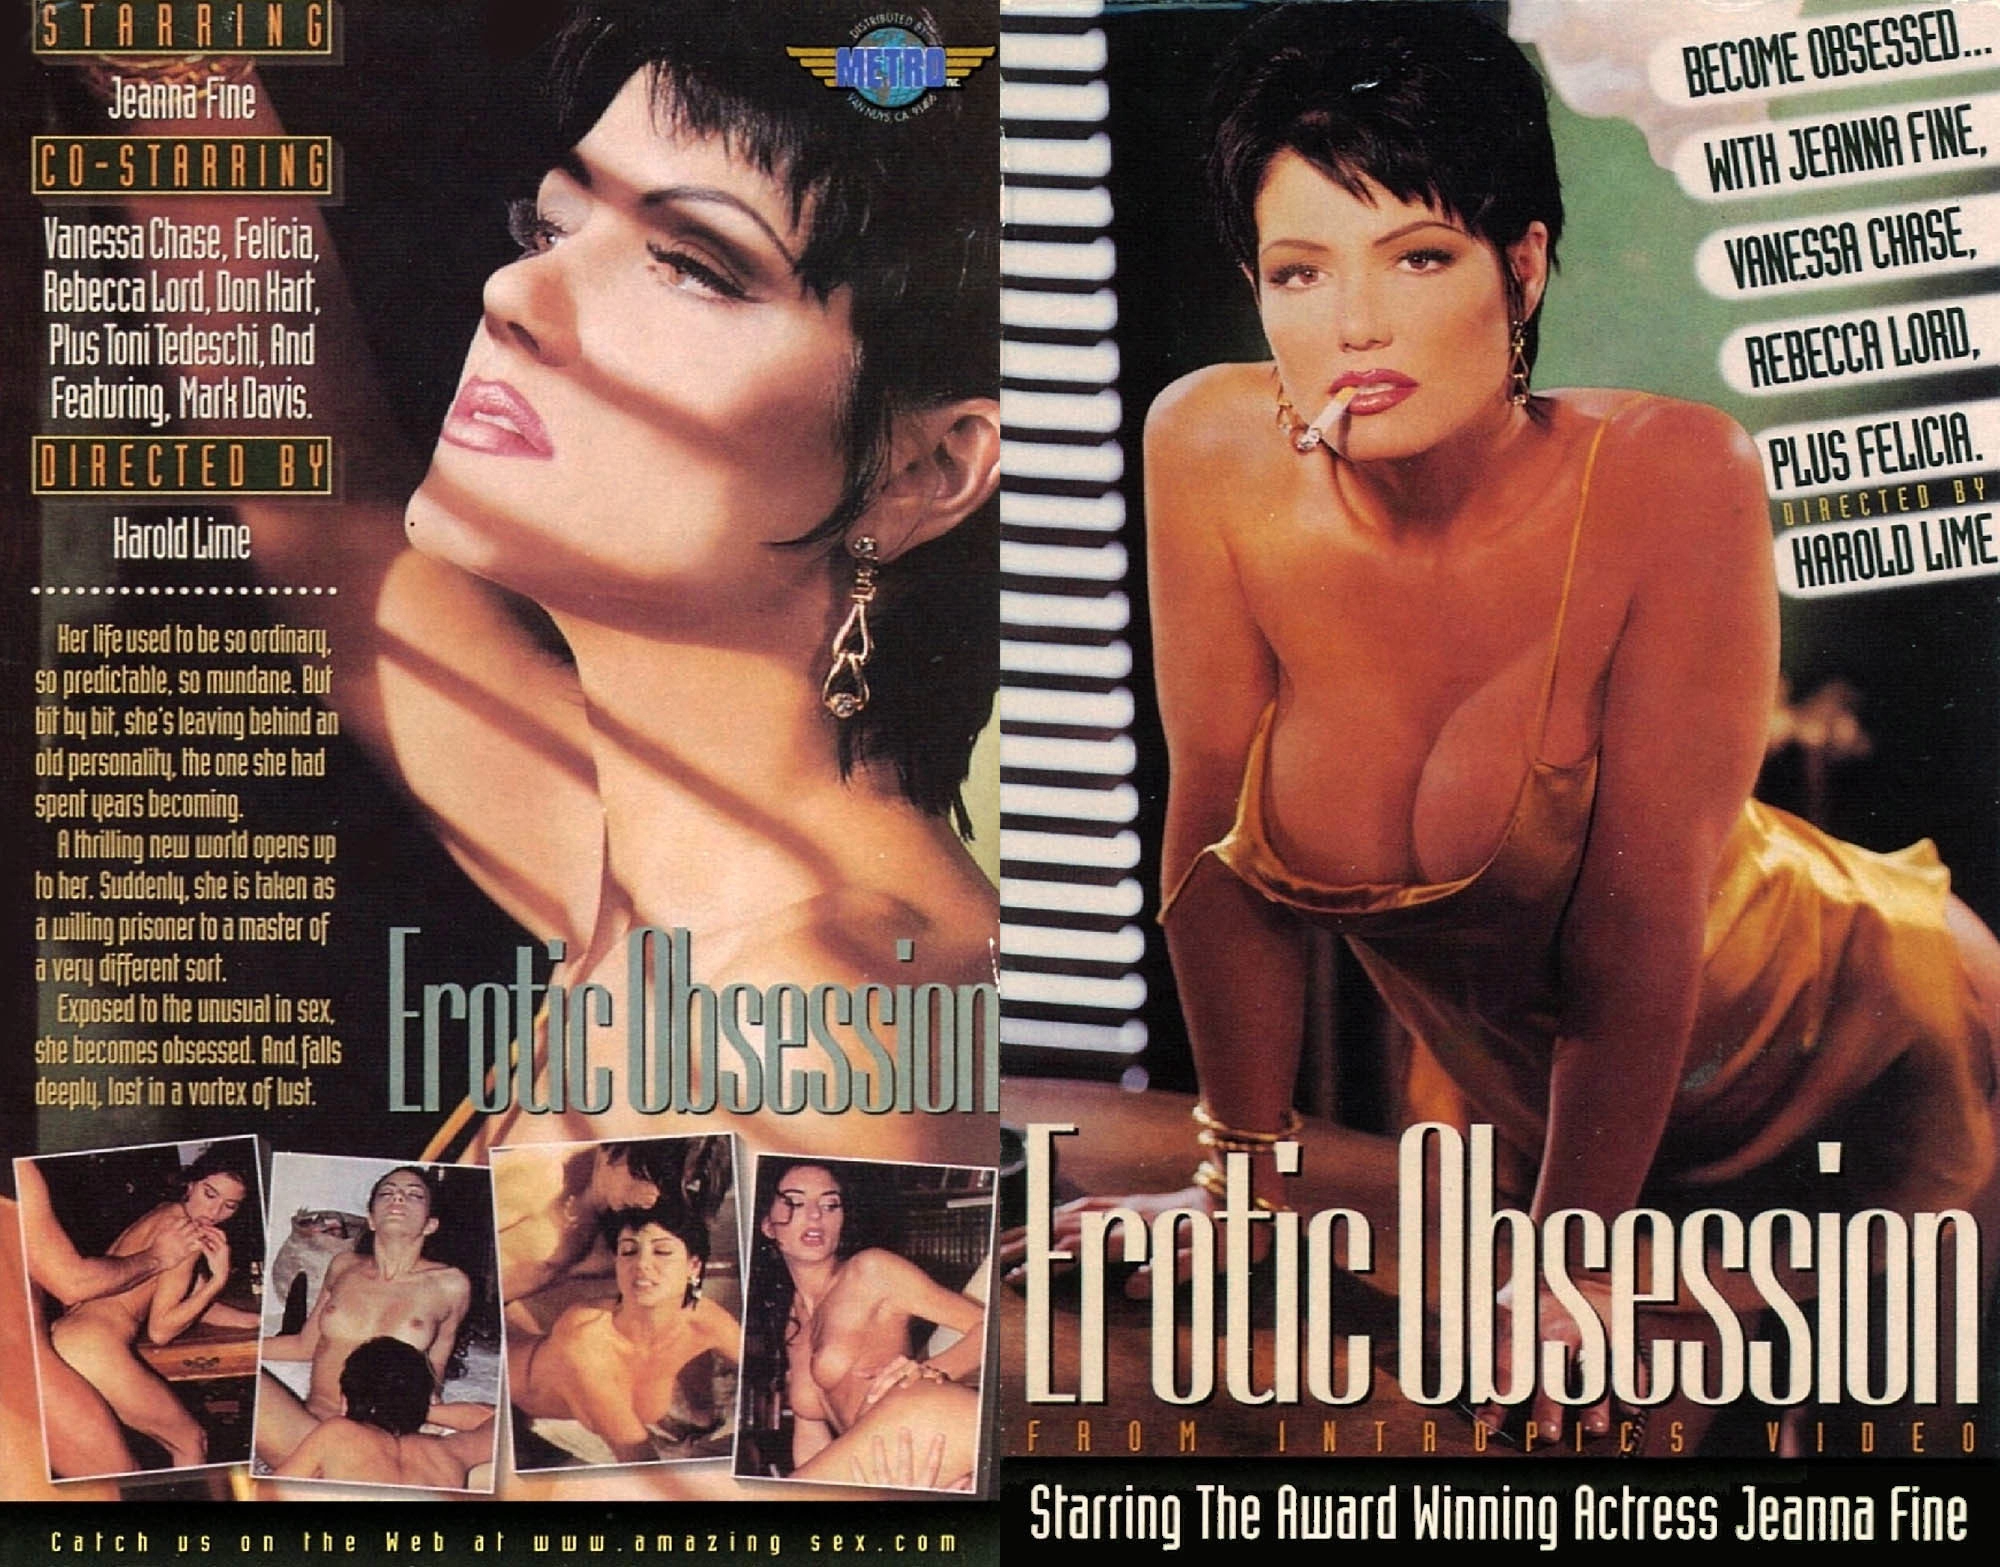 Erotic Obsession - 1995 - Harold Lime